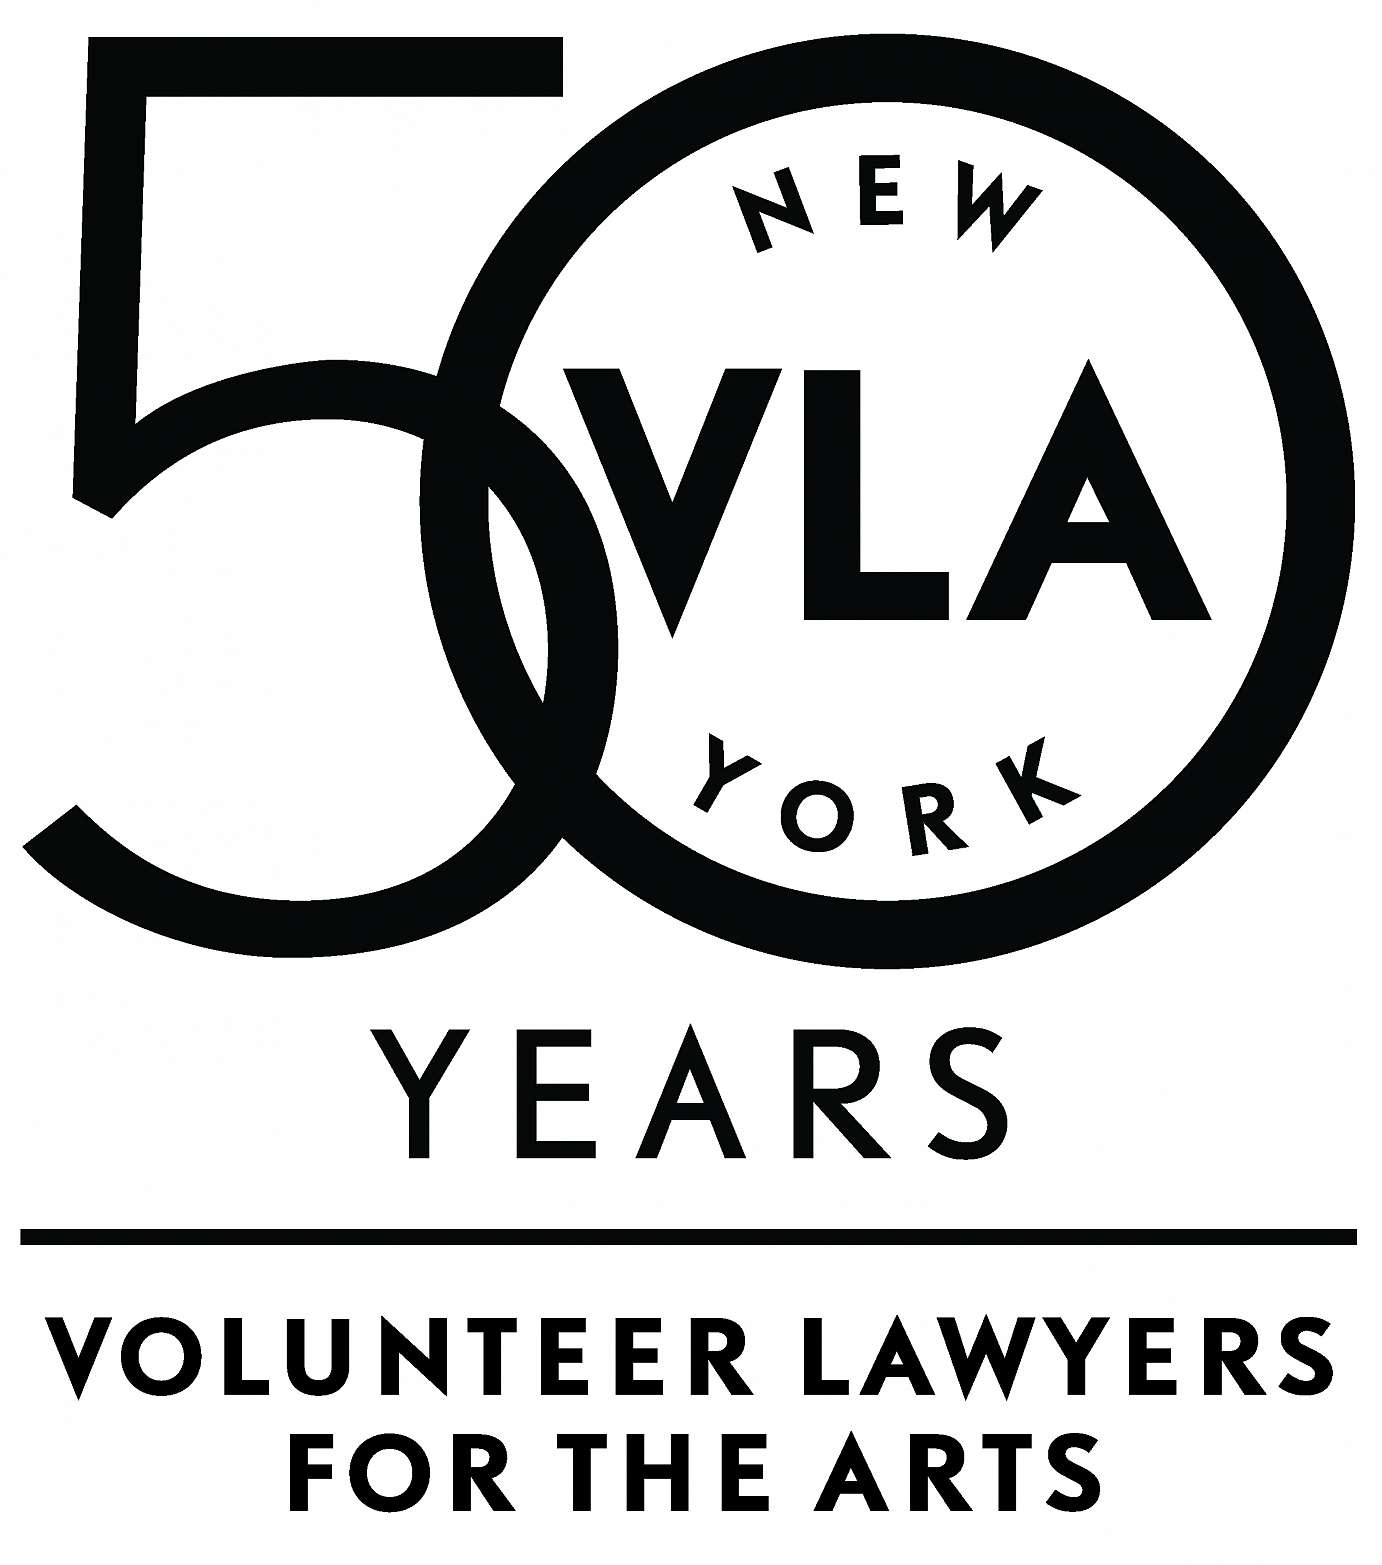 Volunteer Lawyers for The Arts